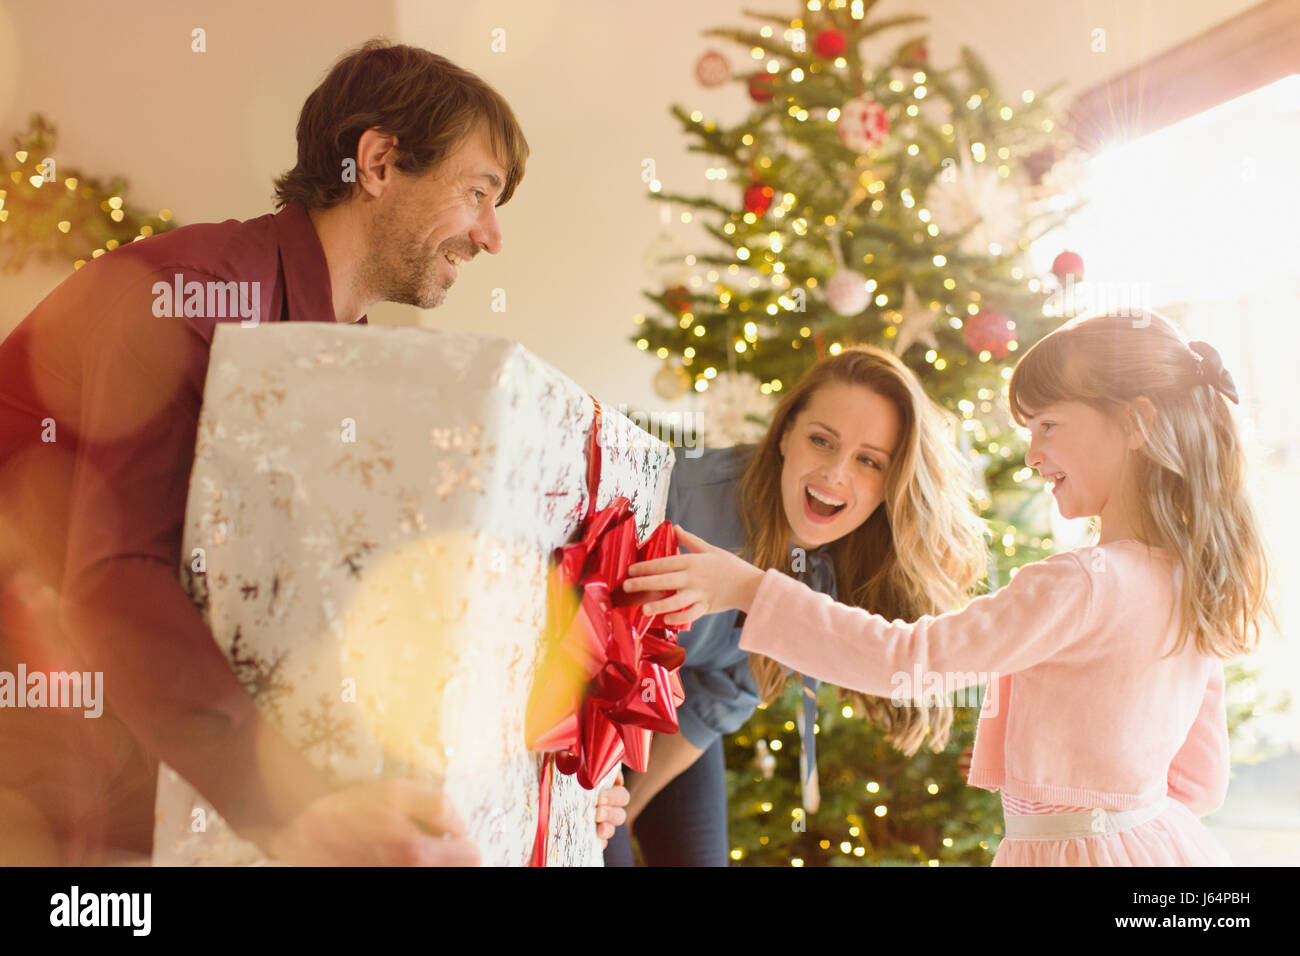 Parents giving large Christmas gift to daughter near Christmas tree Stock Photo